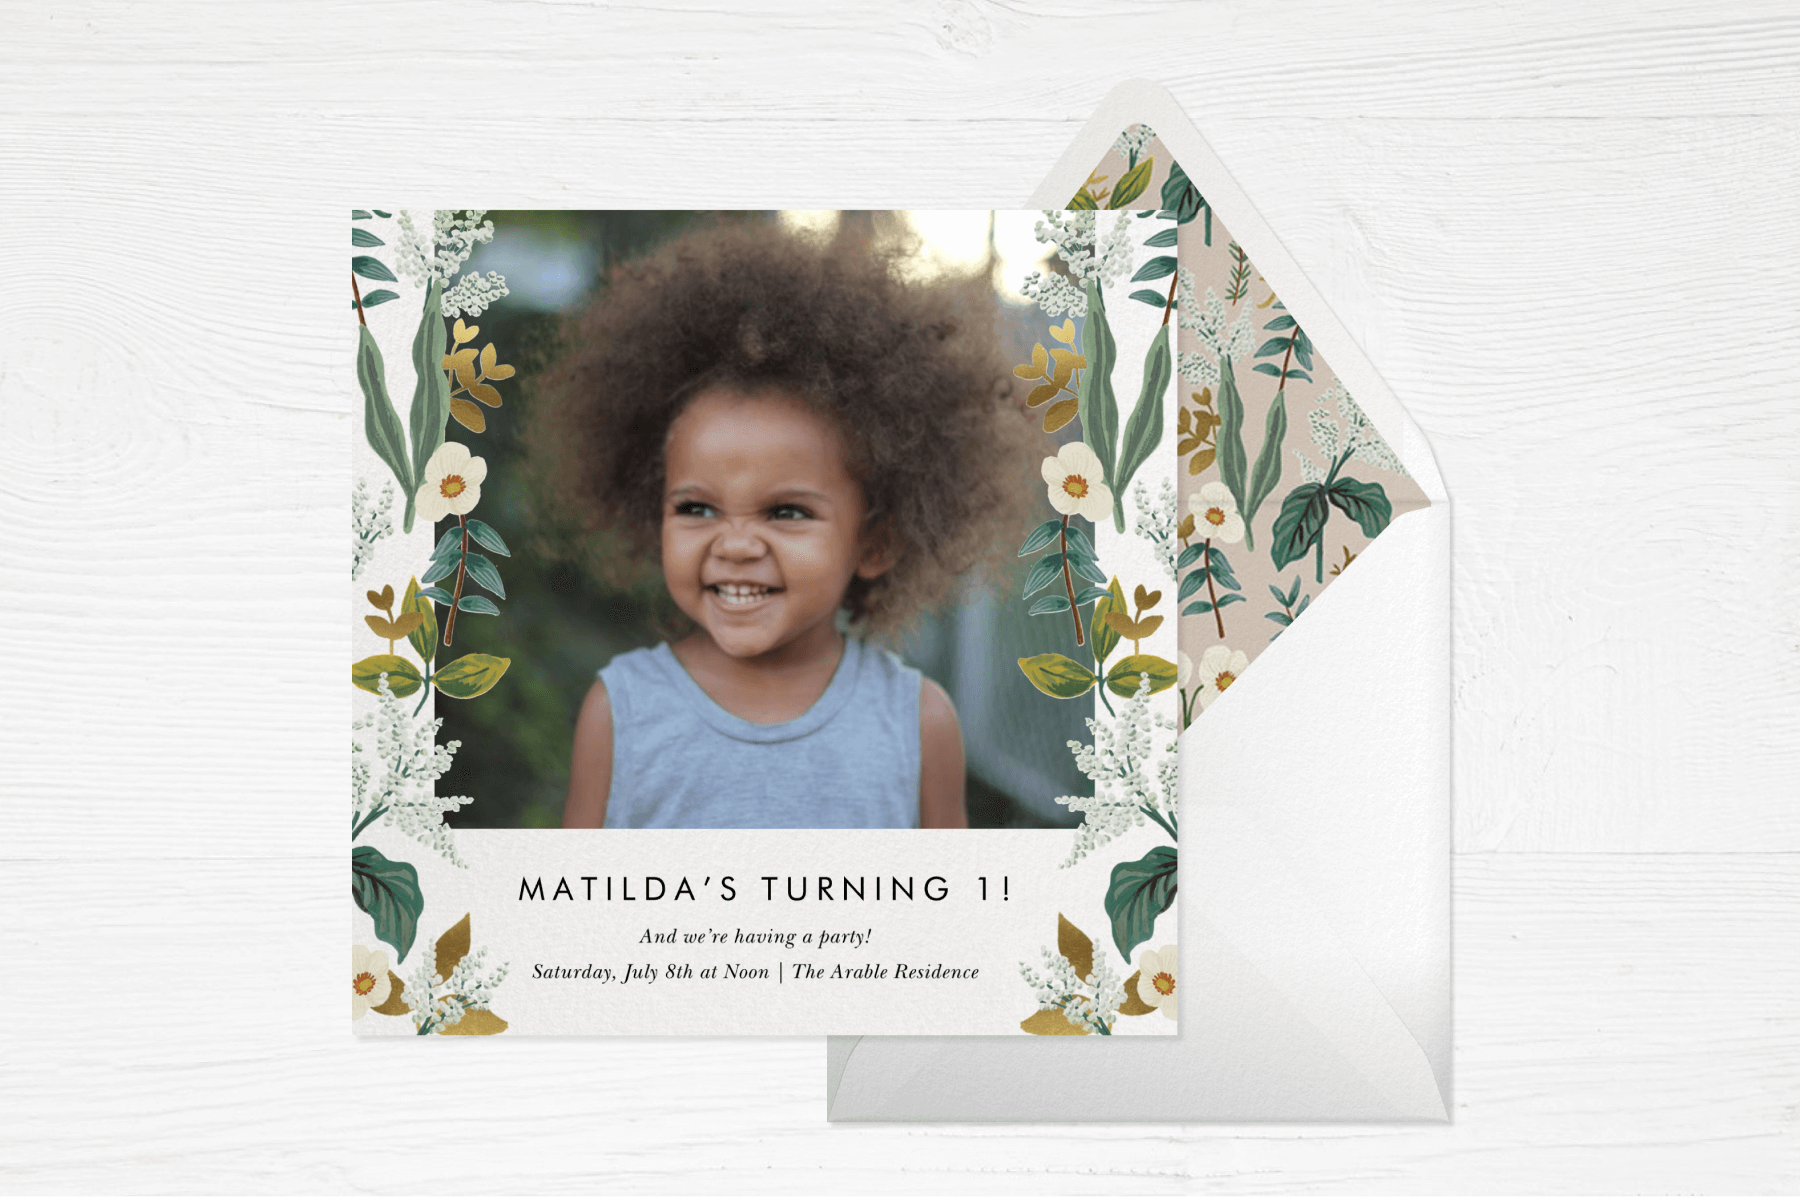 A birthday invitation reads “Matilda’s turning 1!” with a photo of a young girl and a leafy floral border on each side.